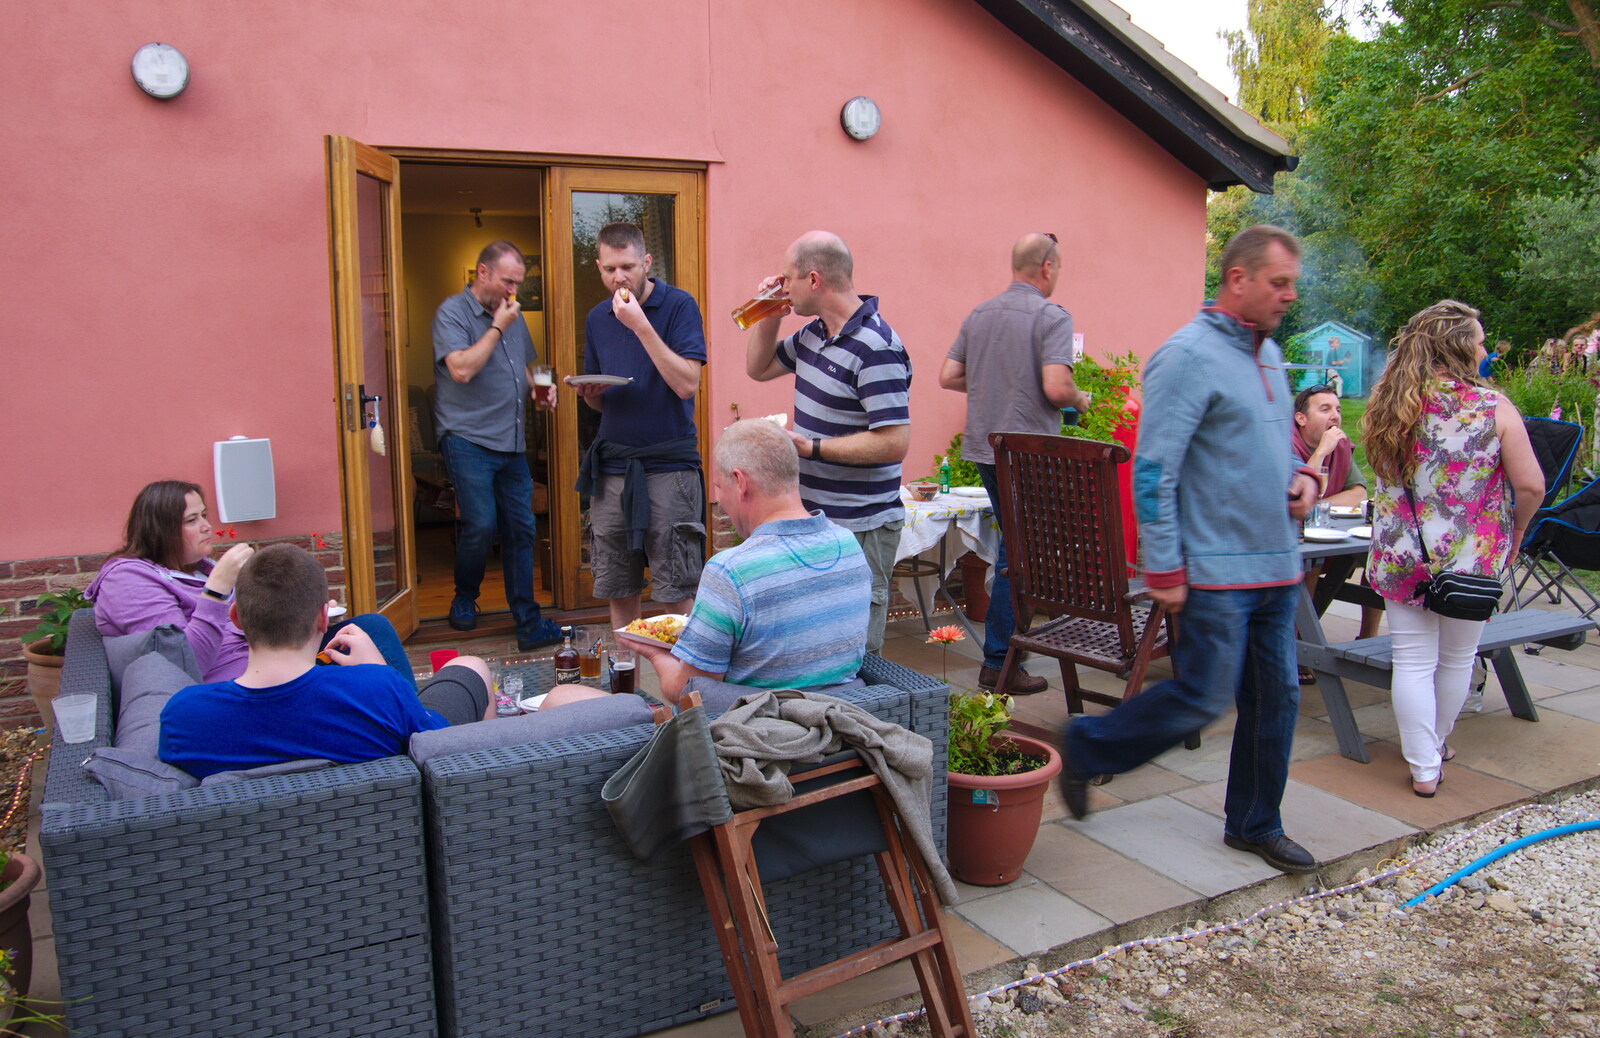 More mingling from A Summer Party, Brome, Suffolk - 3rd August 2019